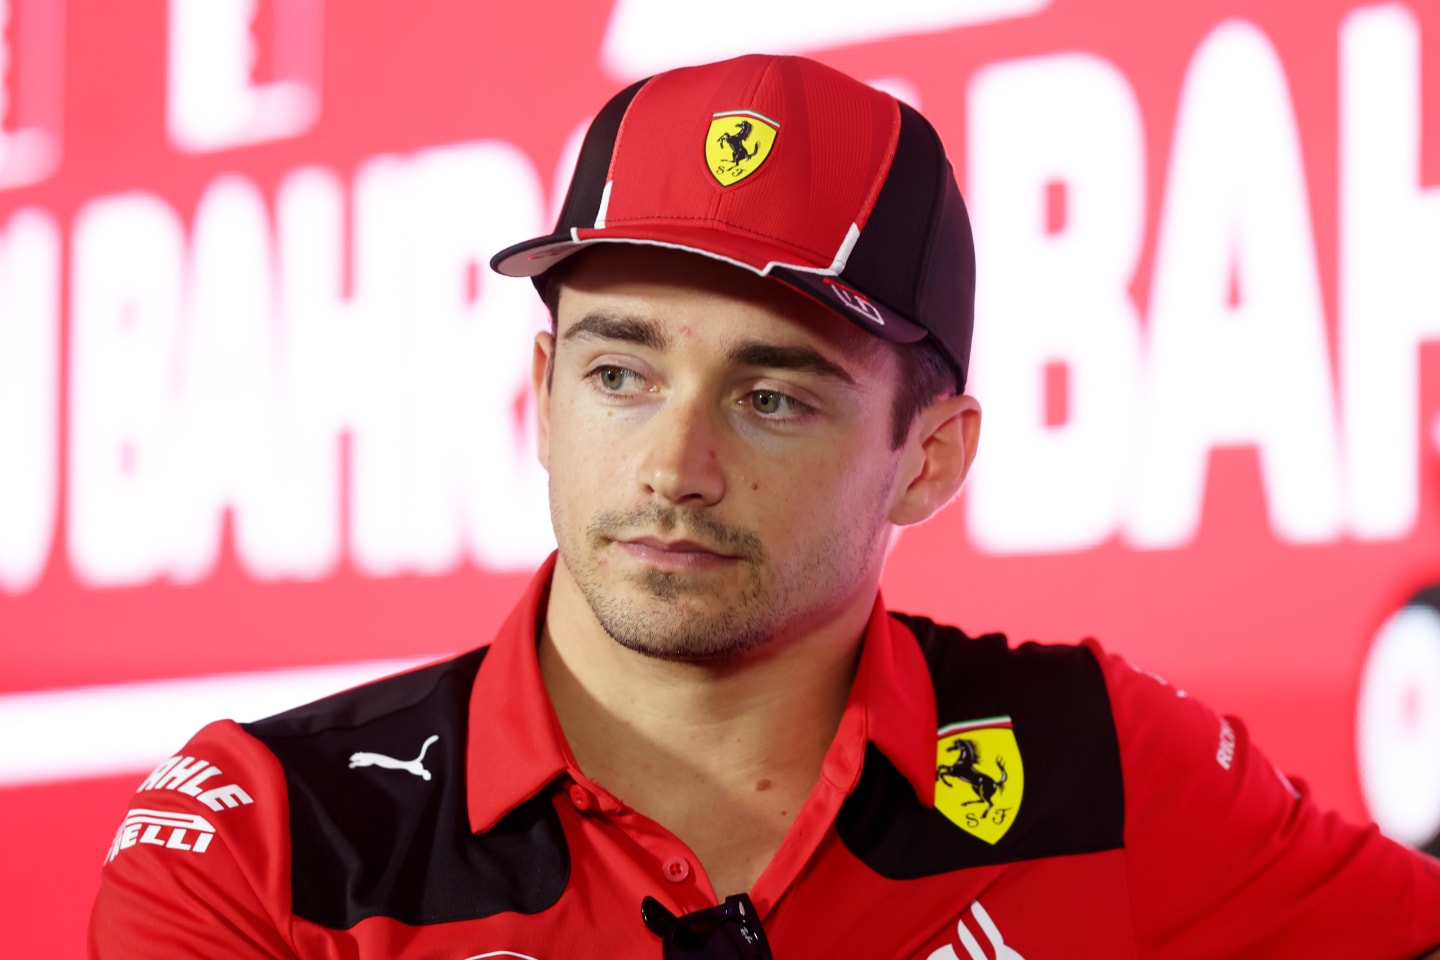 BAHRAIN, BAHRAIN - MARCH 02: Charles Leclerc of Monaco and Ferrari attends the Drivers Press Conference during previews ahead of the F1 Grand Prix of Bahrain at Bahrain International Circuit on March 02, 2023 in Bahrain, Bahrain. (Photo by Lars Baron/Getty Images)